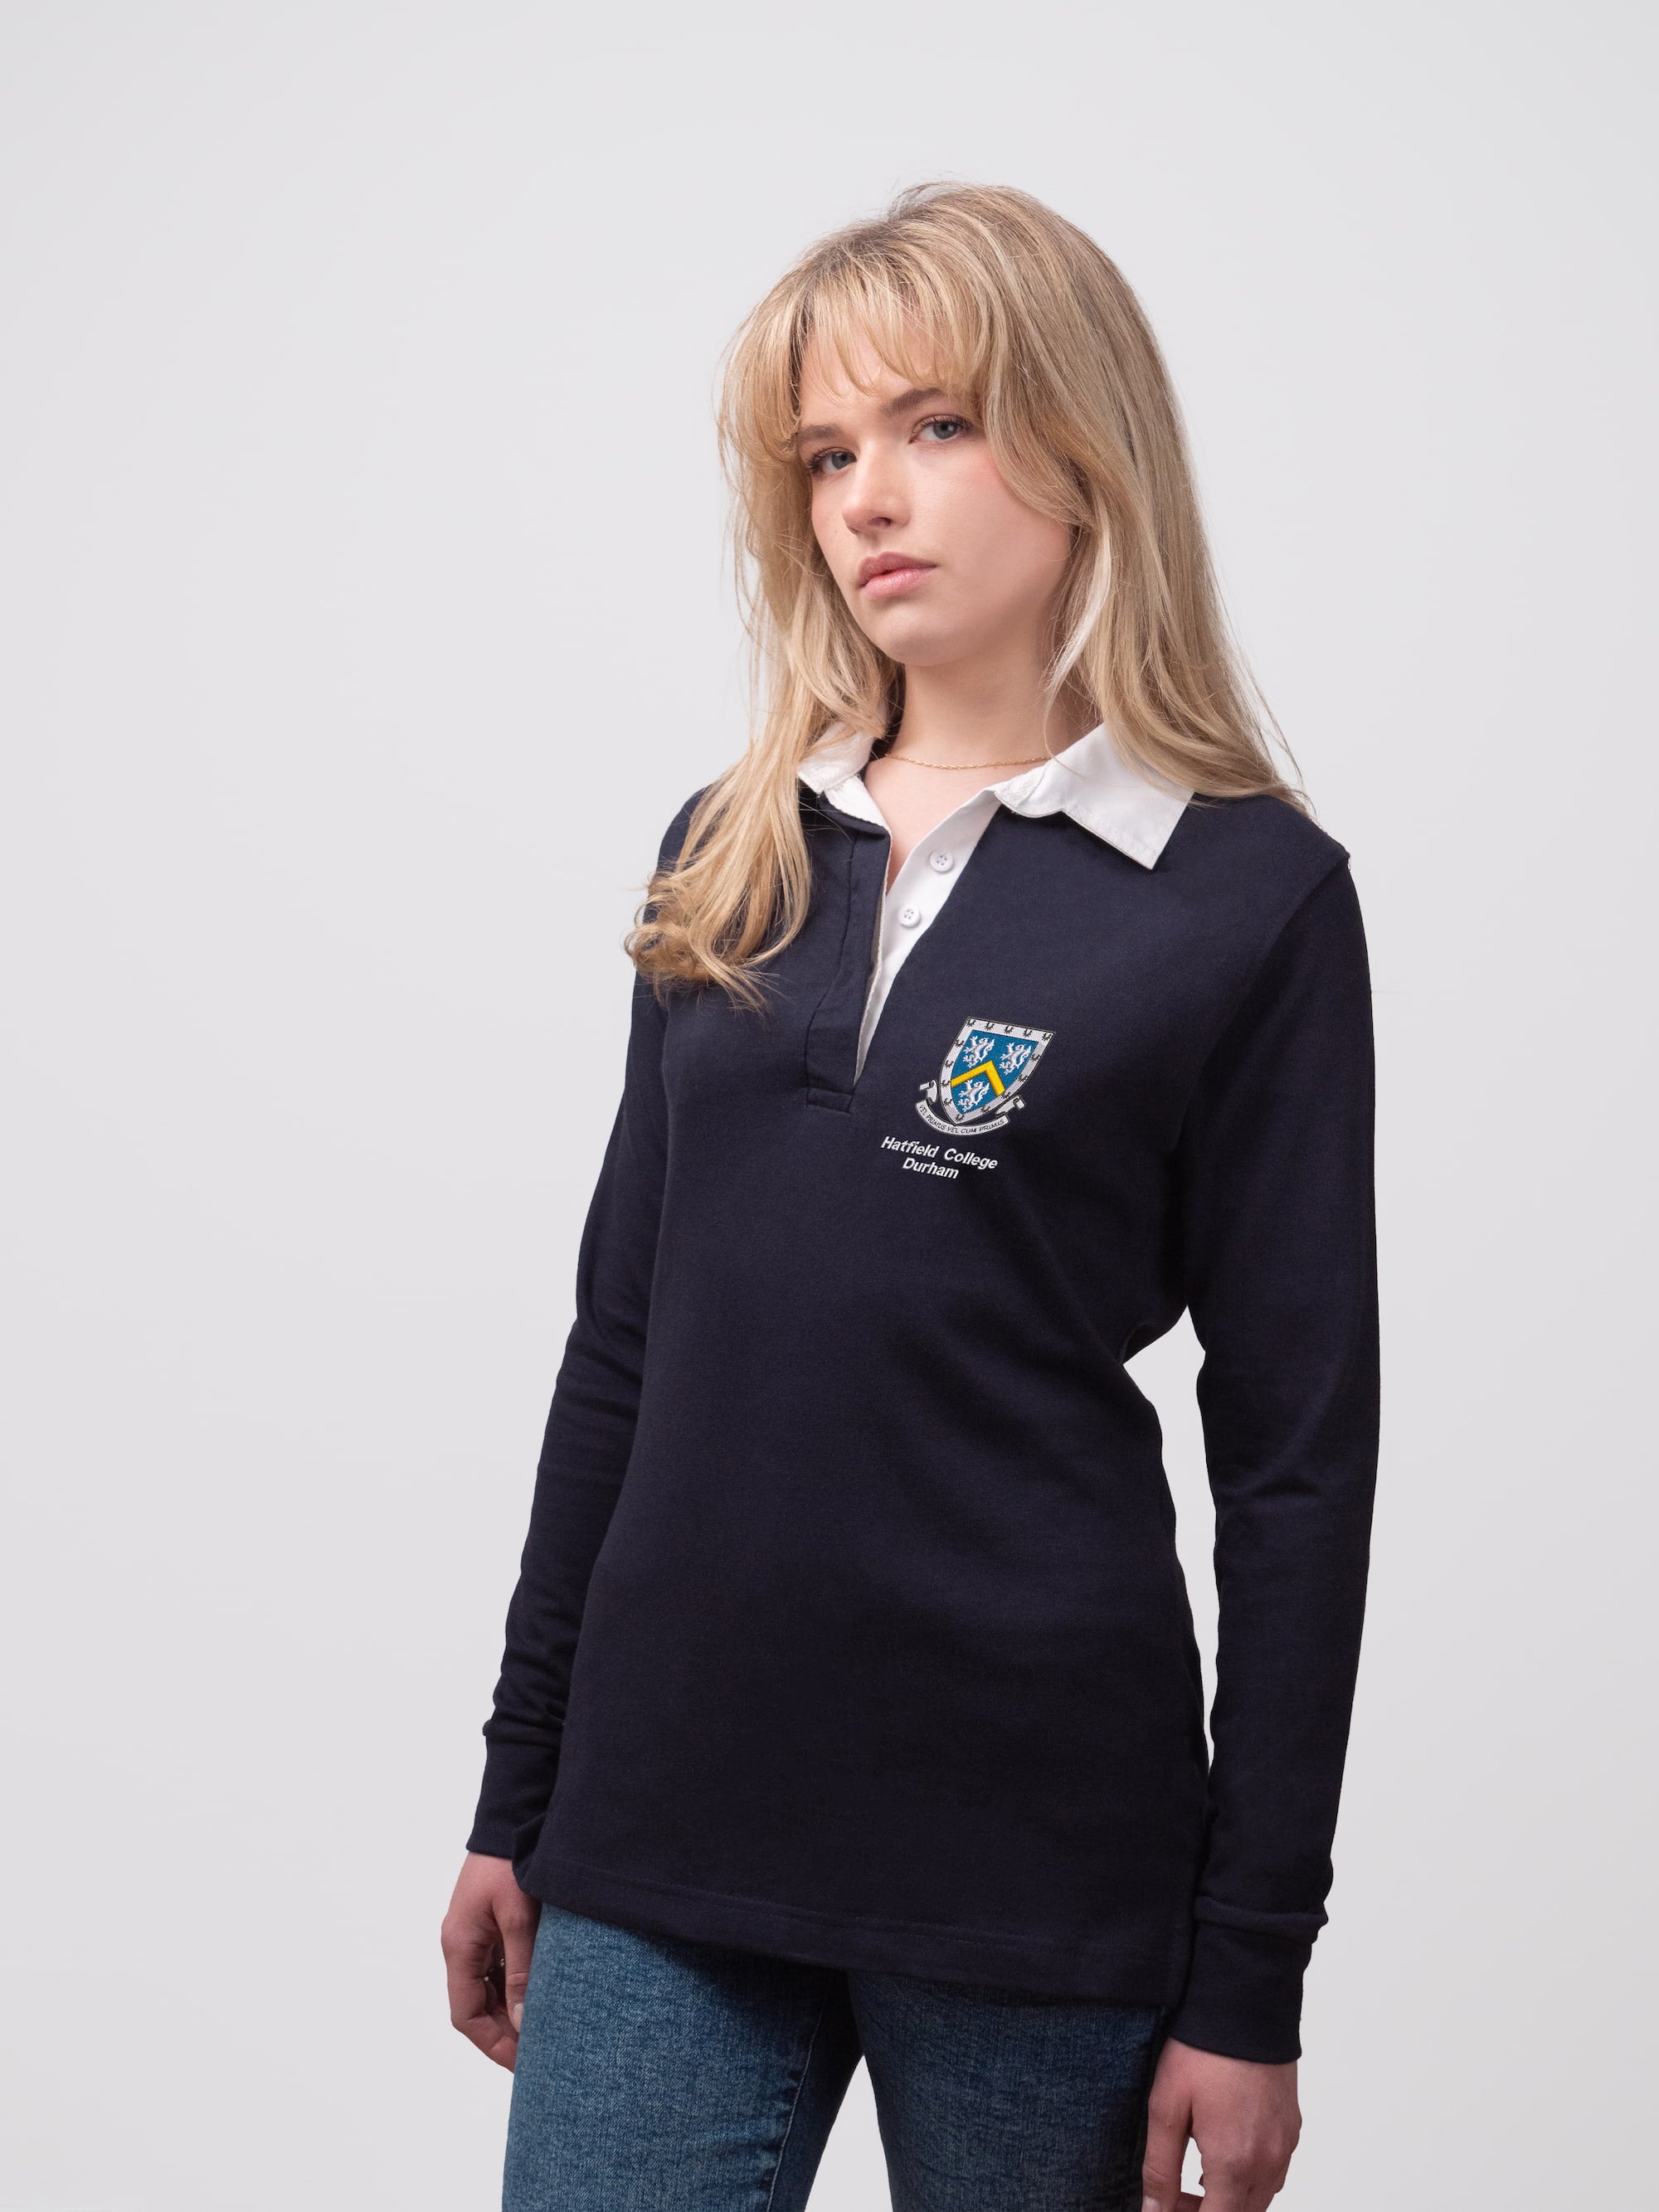 Student wearing a navy Hatfield College rugby shirt with embroidered crest